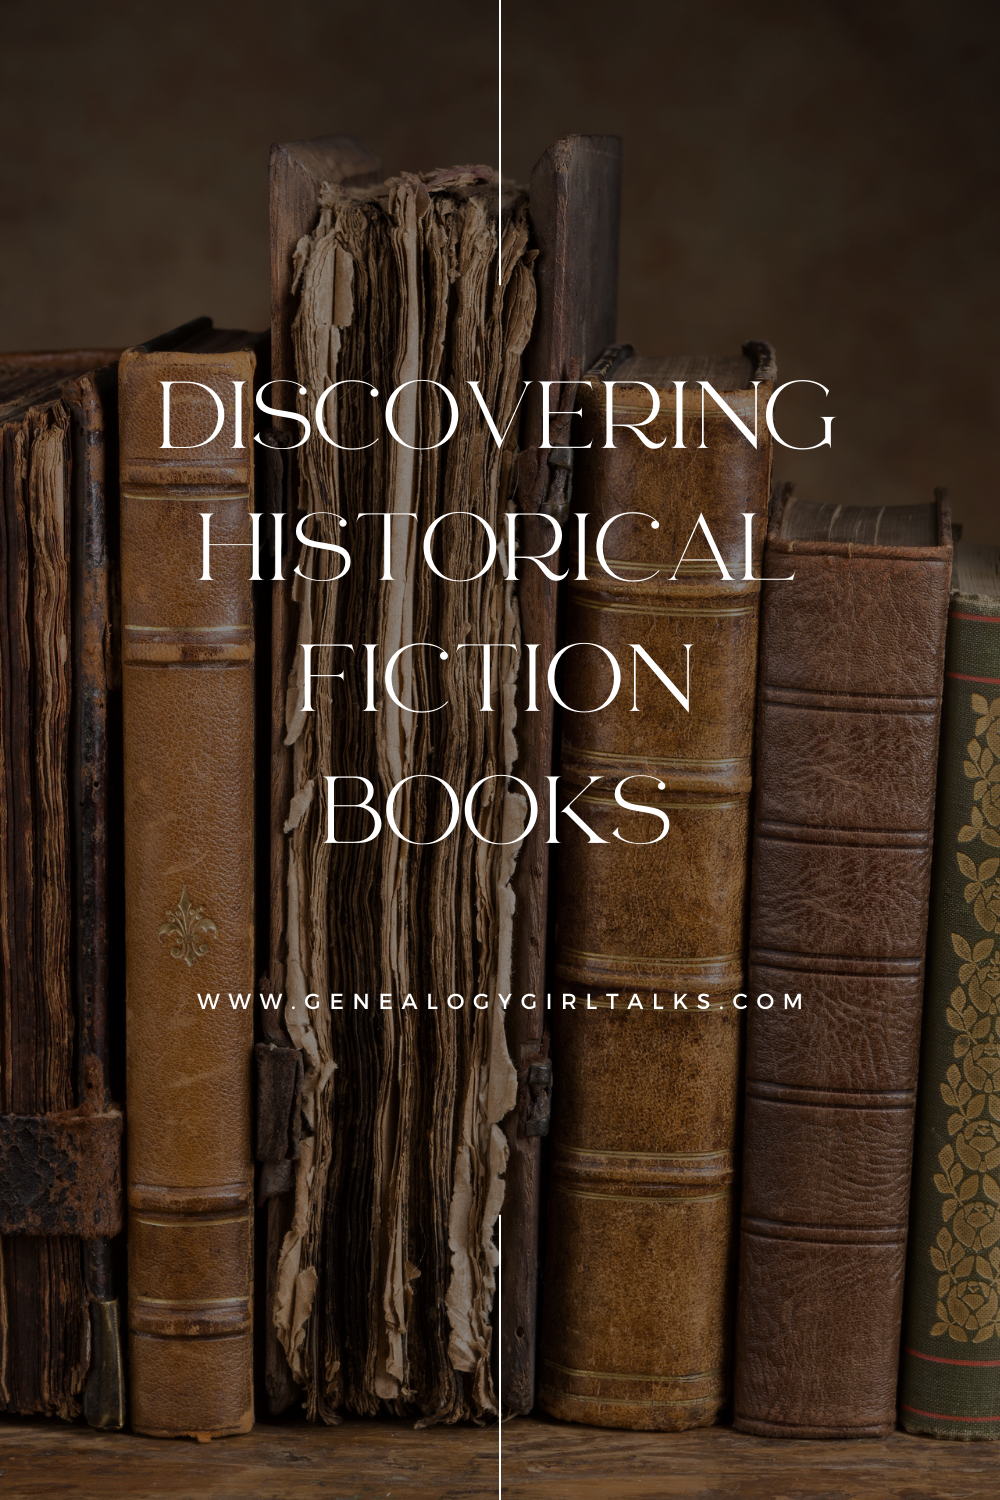 Discovering Historical Fiction Books by Genealogy Girl Talks